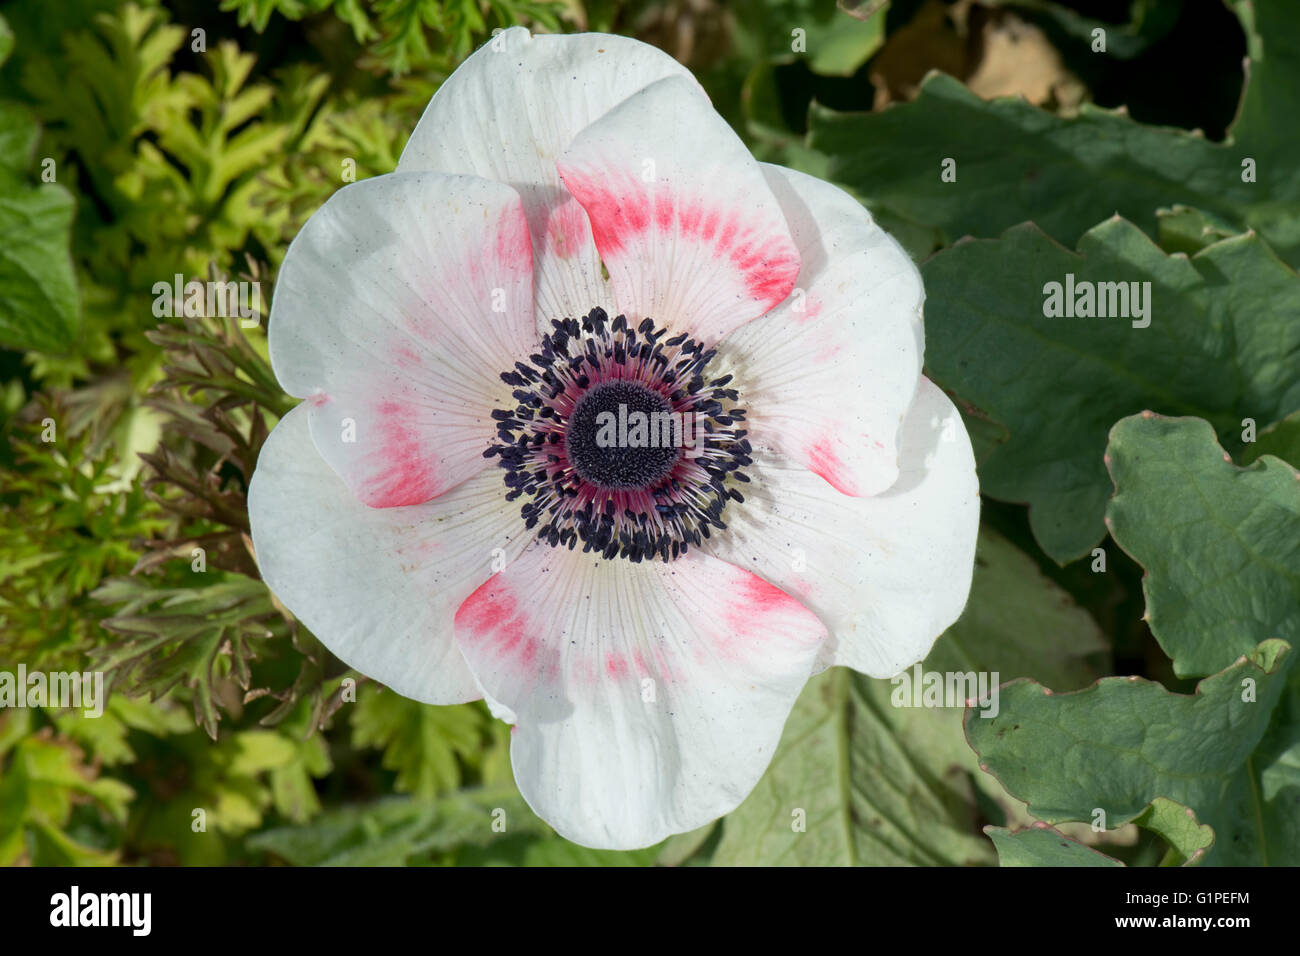 White flower tinged with pink of a poppy anemone, Anemone coranaria, with dark anthers and styles, May Stock Photo